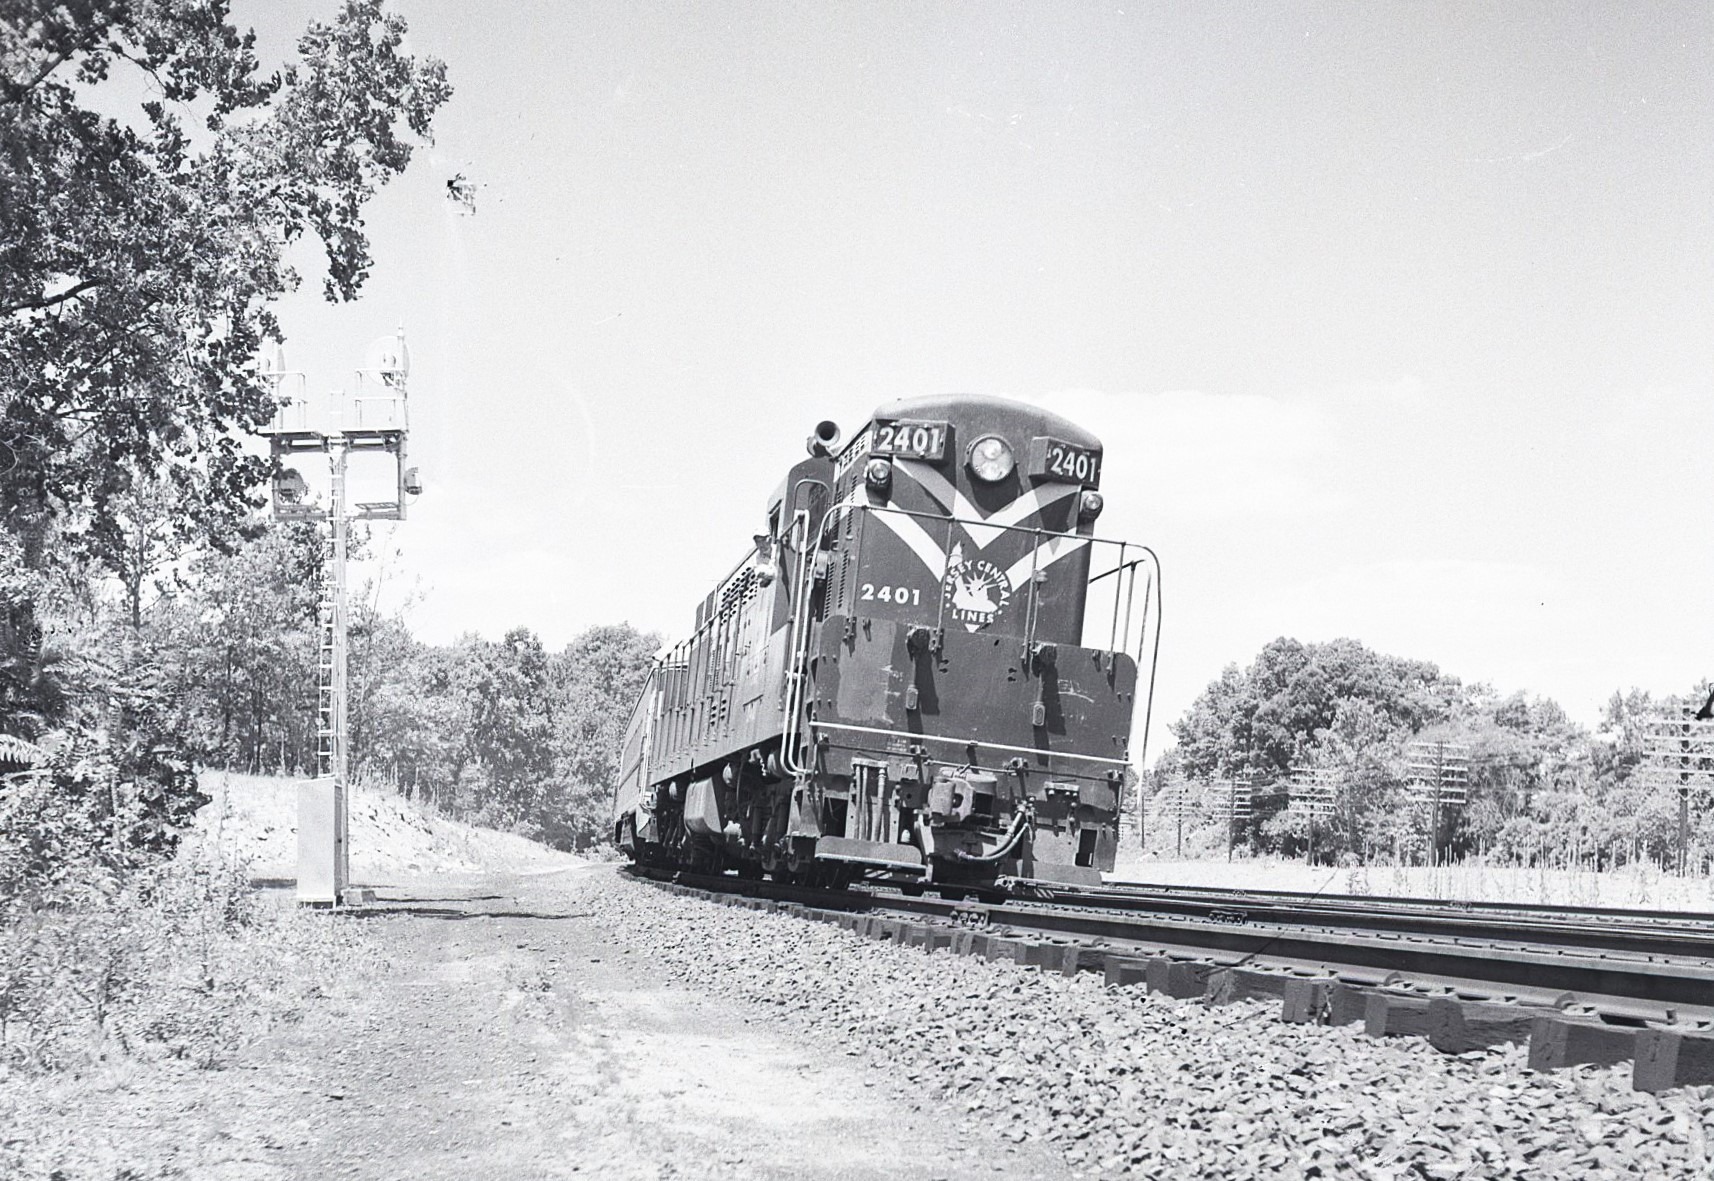 Central Railroad of New Jersey | Reading Company | Valley Forge, Pa. | Fairbanks Morse class H24-66 2401 diesel-electric locomotive | Boy Scout Jamboree Special | July 1957 | John Bowman, Jr.